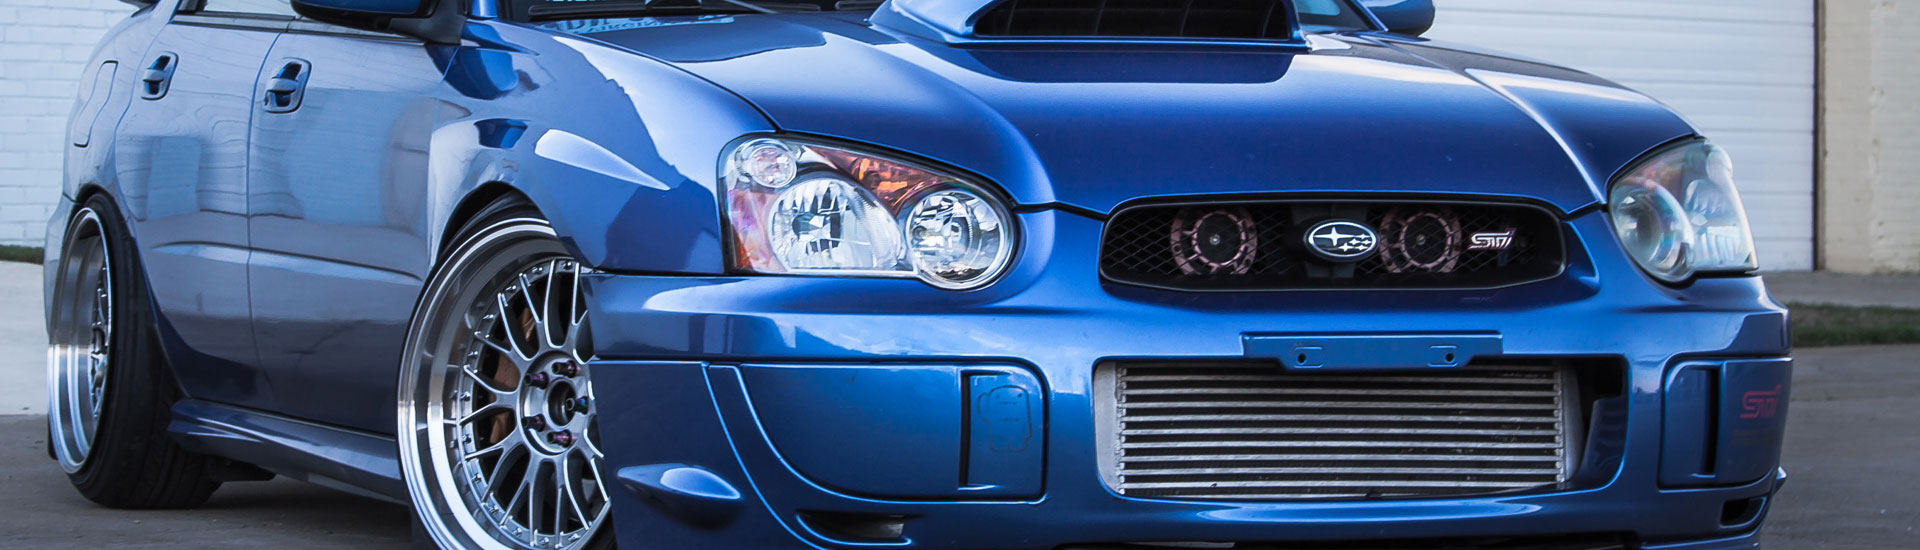 Subaru Aftermarket Accessories and Tints